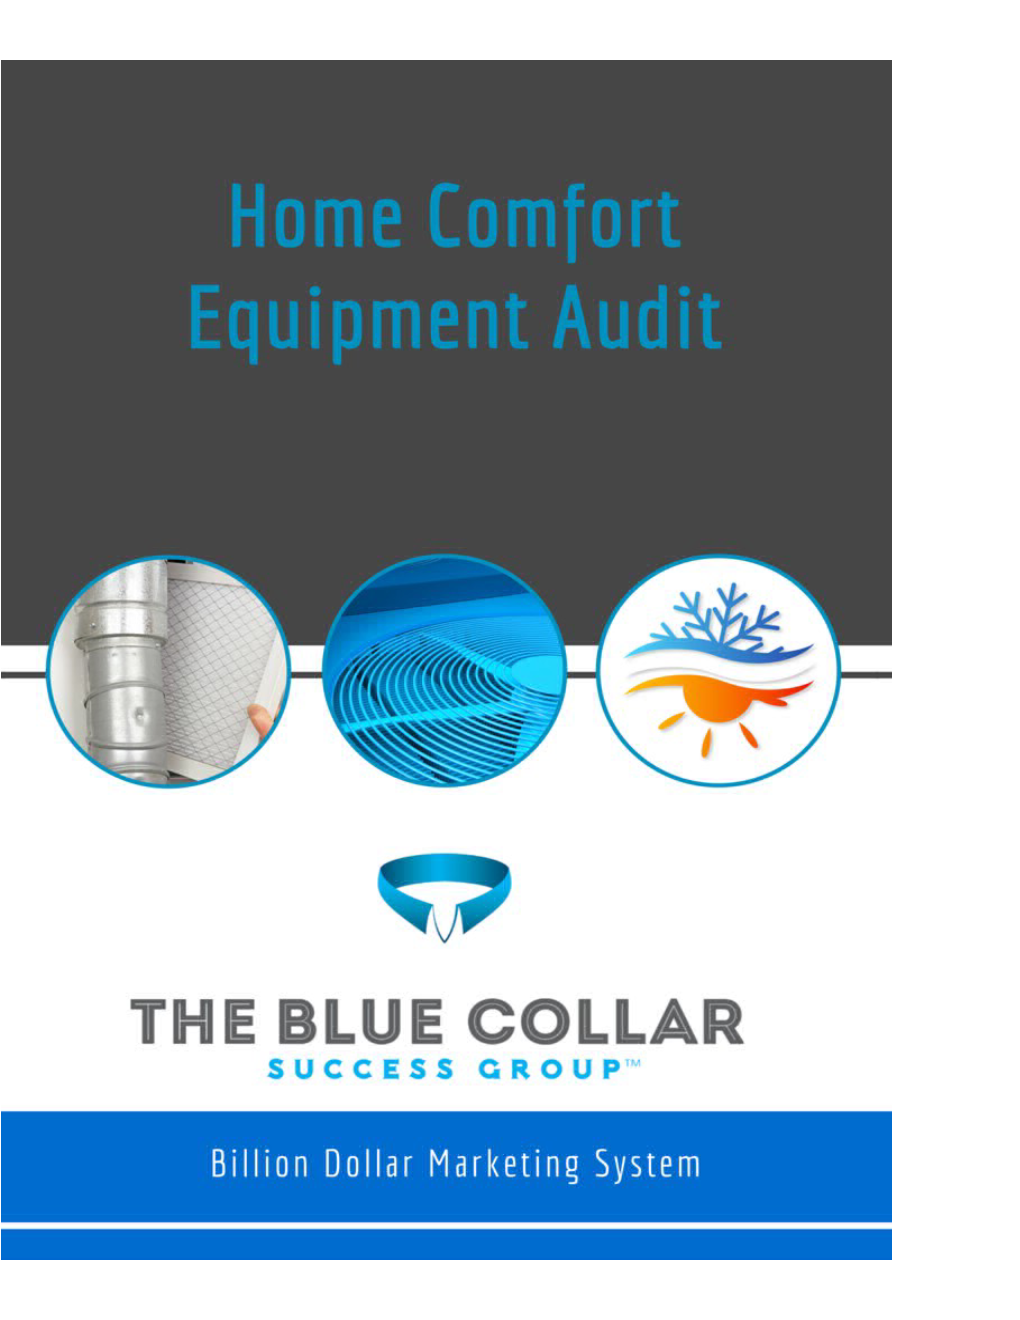 How to Give a Home Comfort Equipment Audit